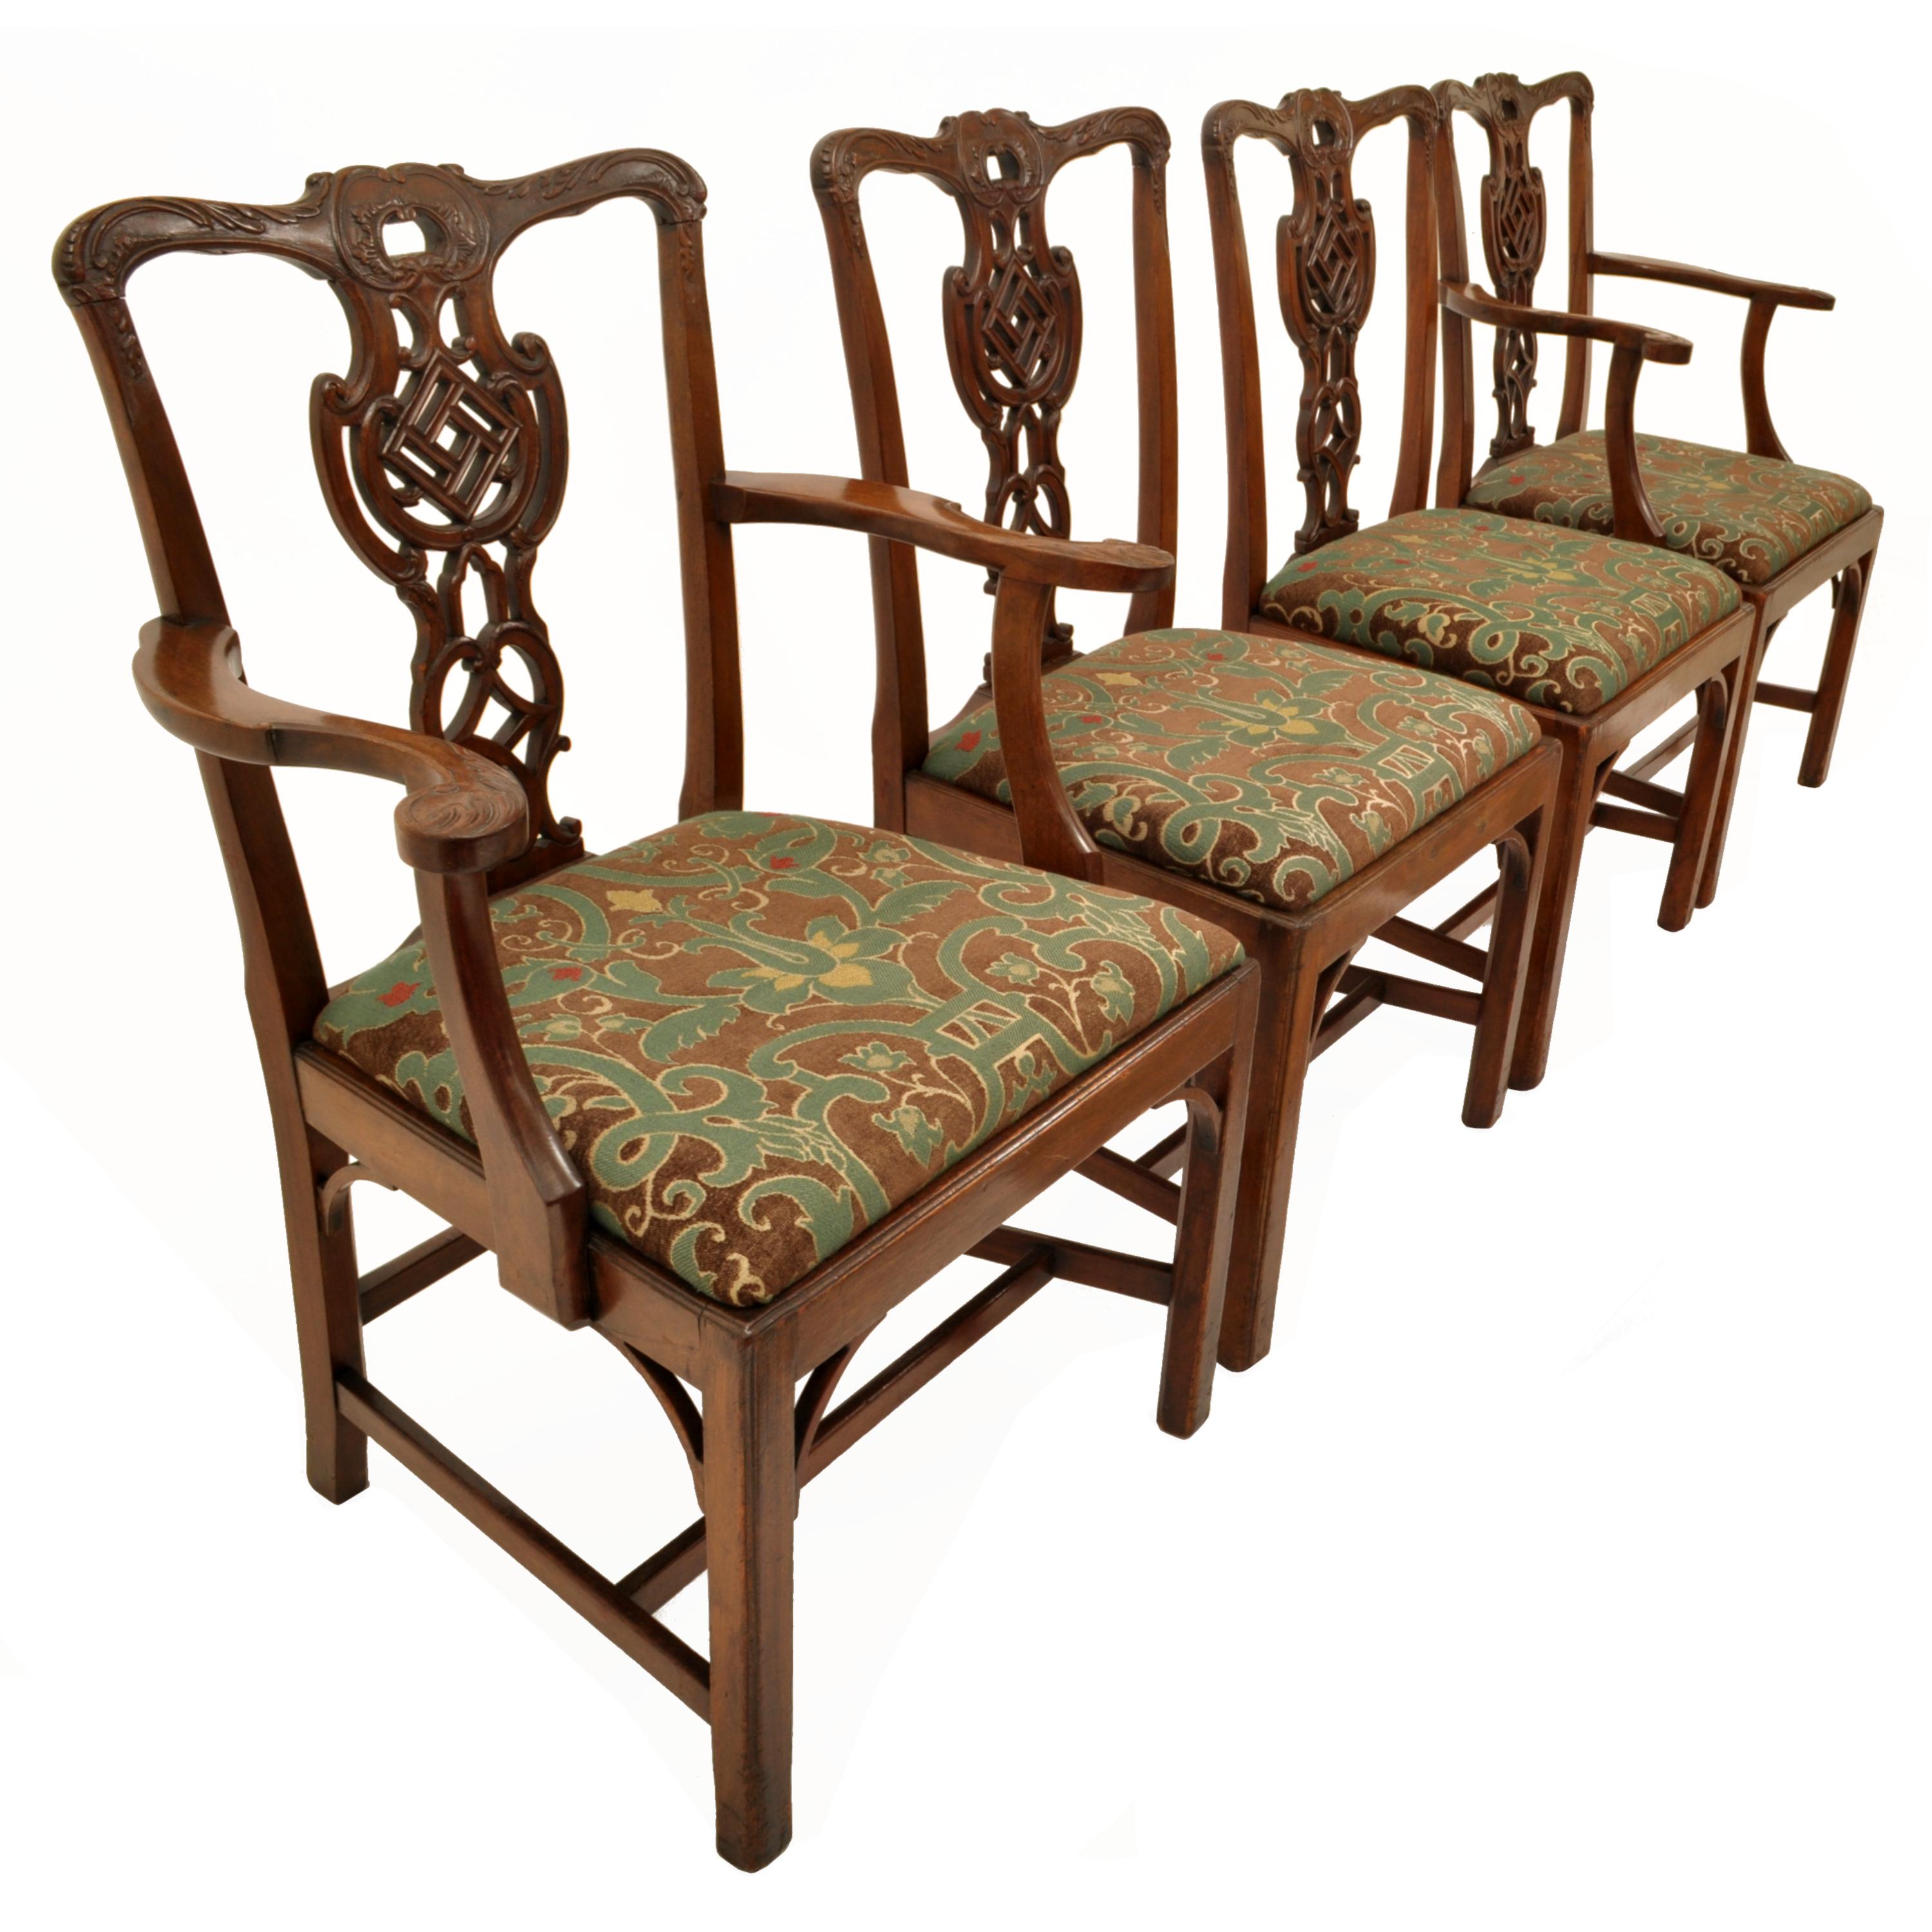 A good set of four antique Chippendale Revival carved mahogany chairs, circa 1890.
The chairs are finely carved from high quality solid mahogany, each chair having back rails & arms carved with acanthus leaves, the vaseiform backsplats are carved in